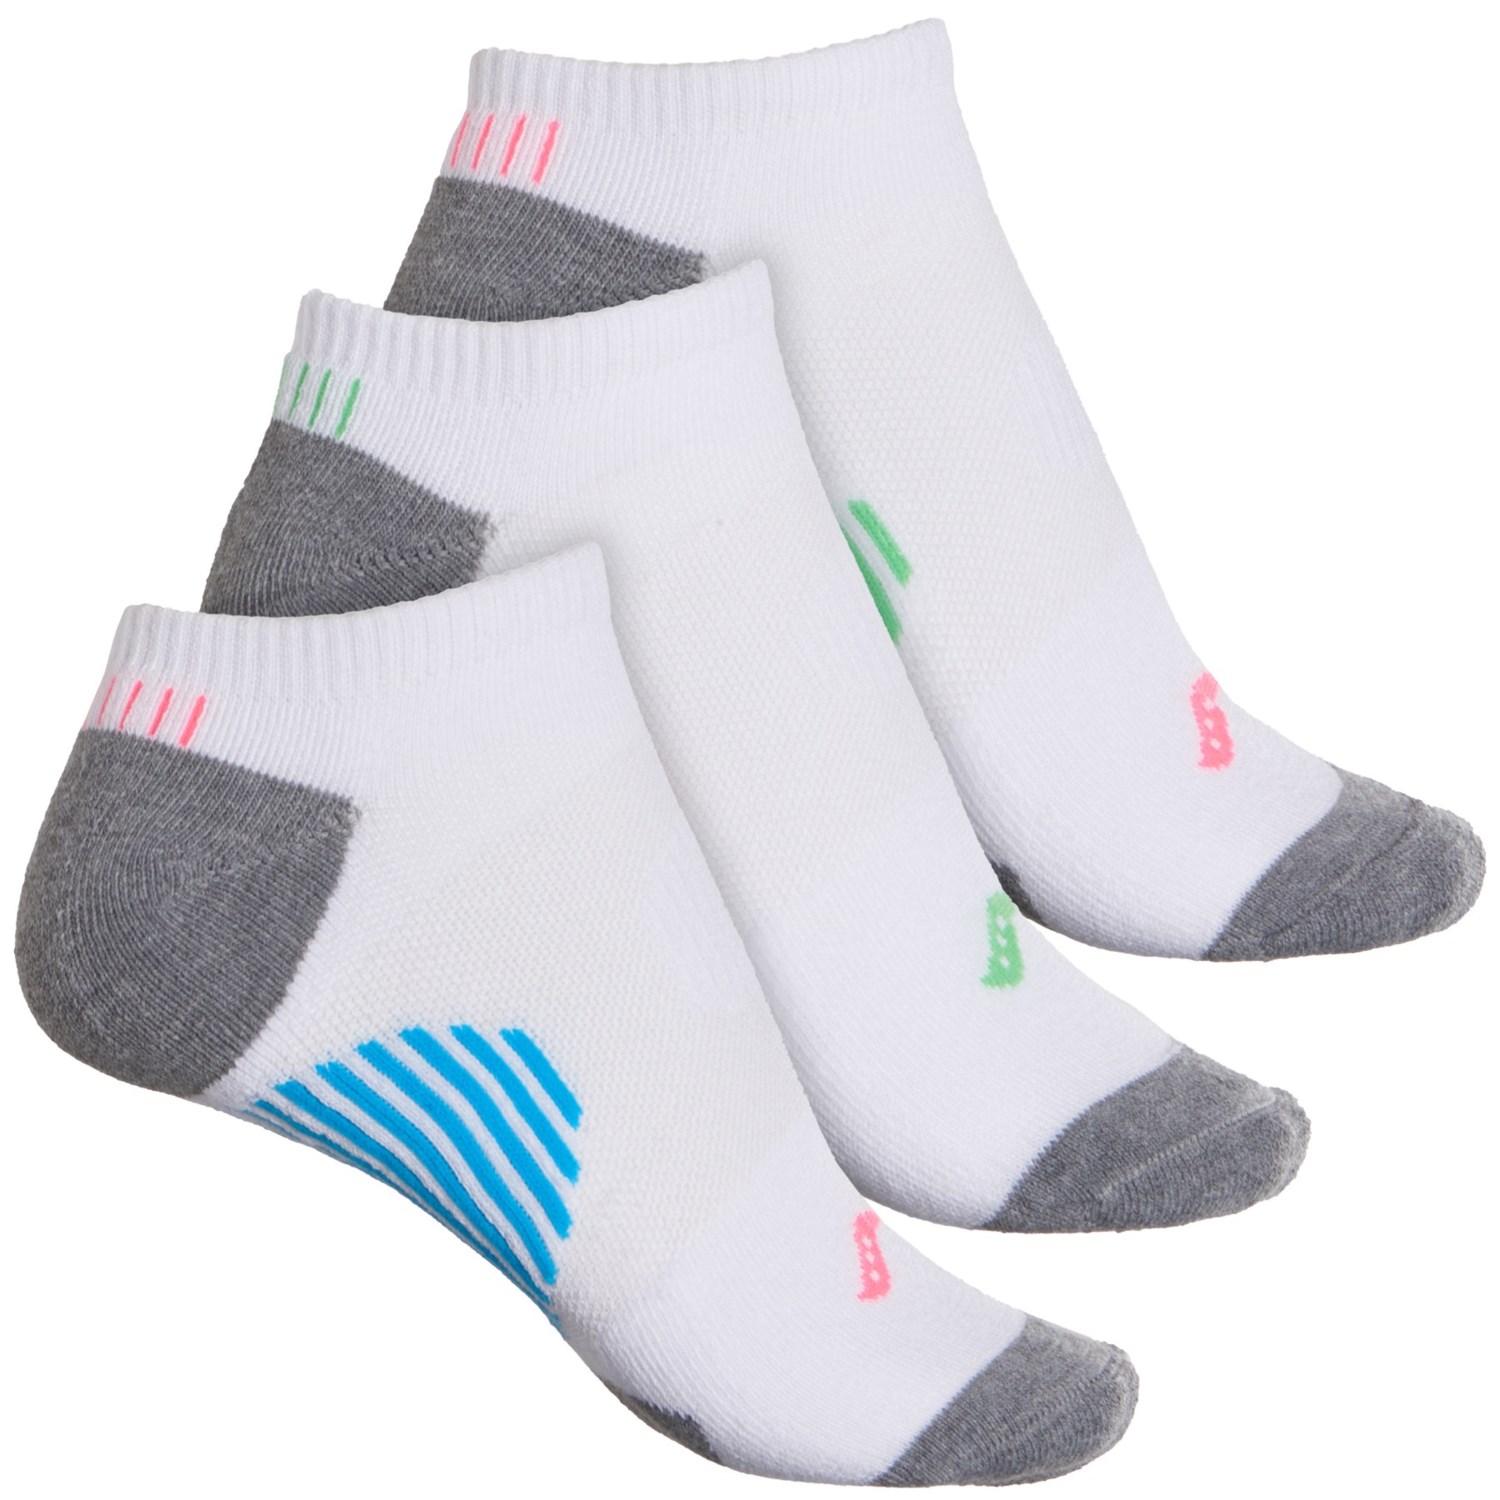 saucony competition series socks